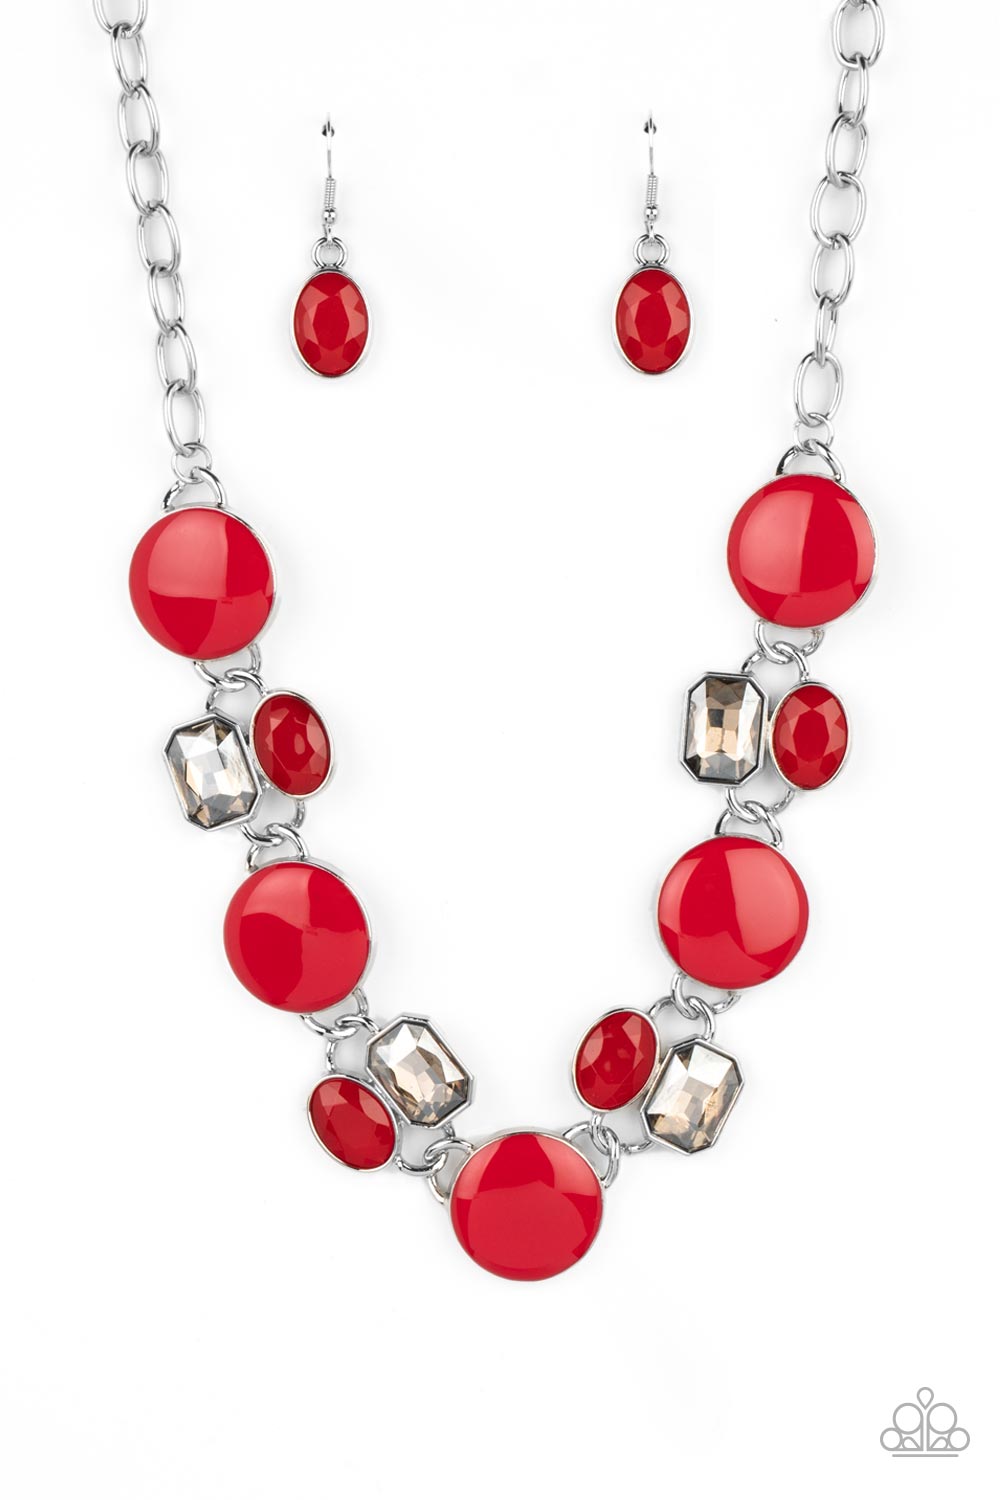 Dreaming in MULTICOLOR - Red Necklace - Paparazzi Accessories